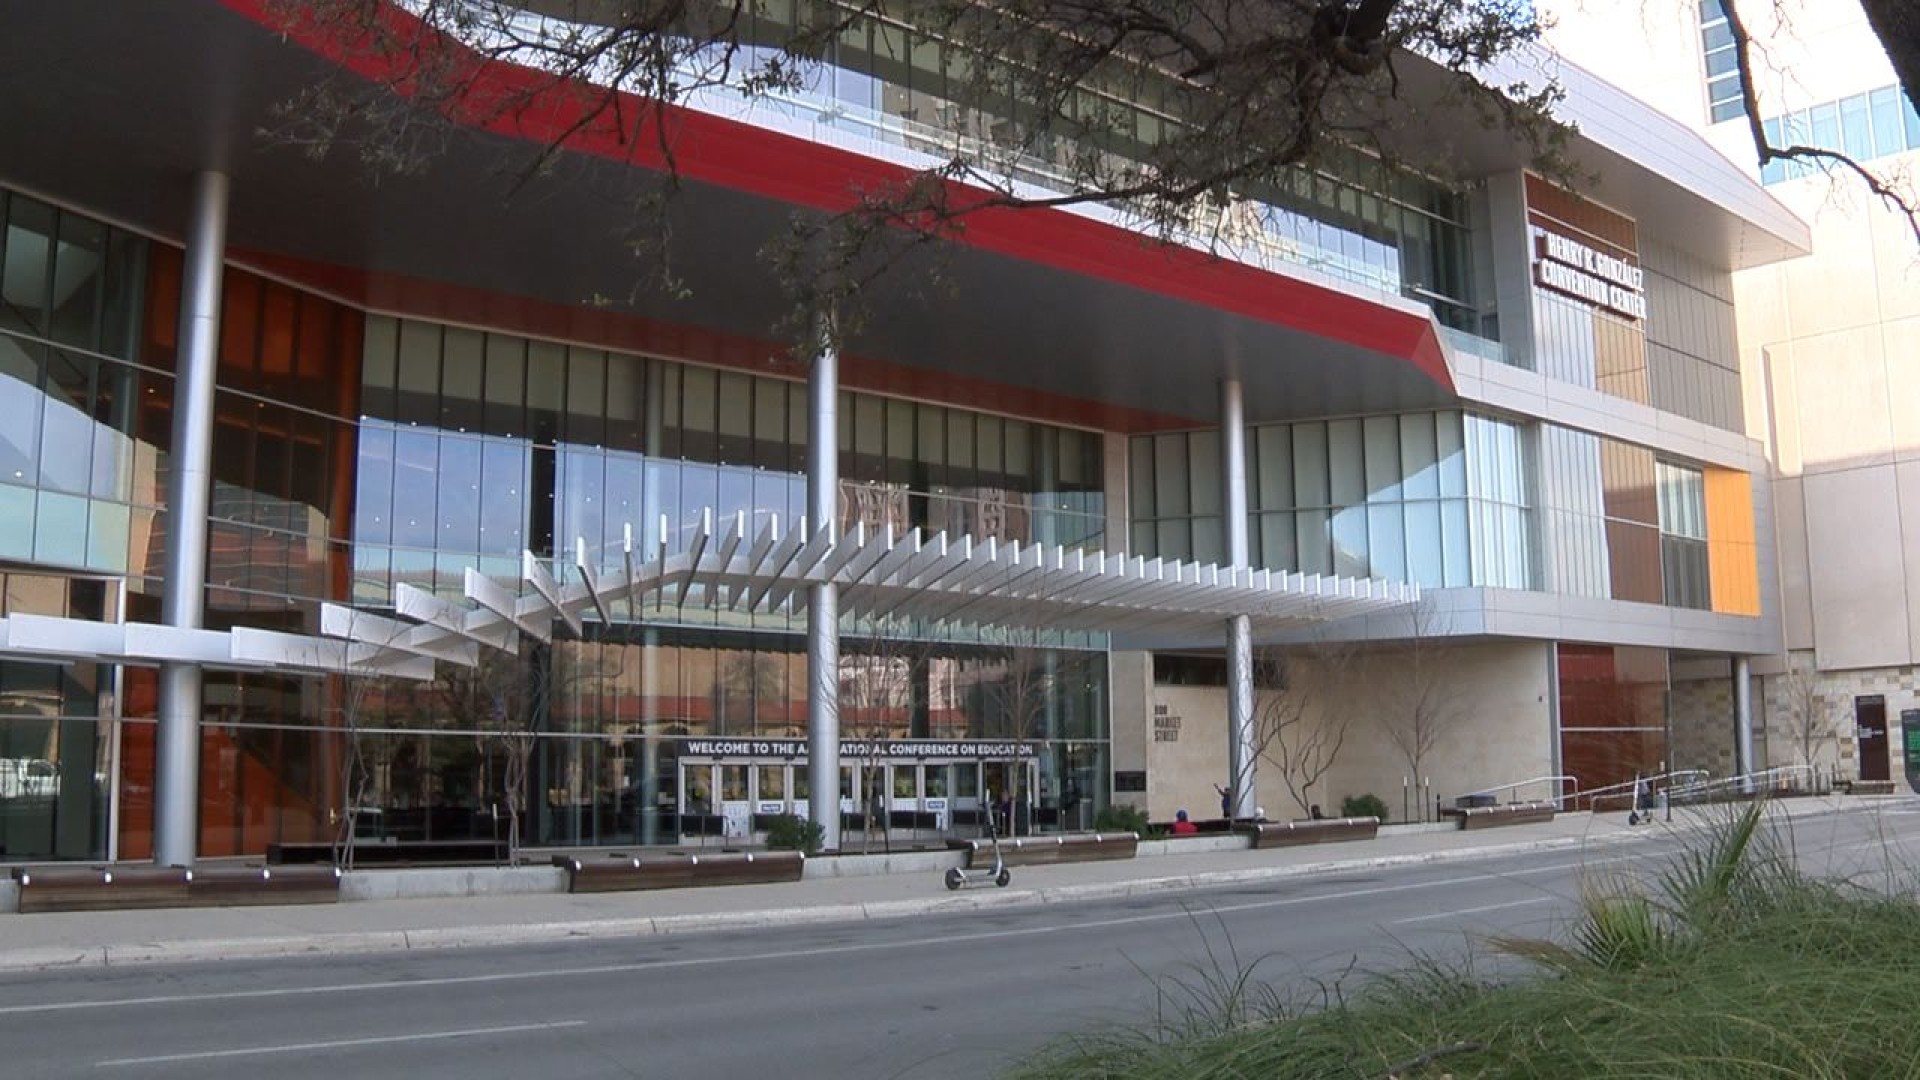 Convention center employee accused of groping female coworkers, exposing himself in an elevator